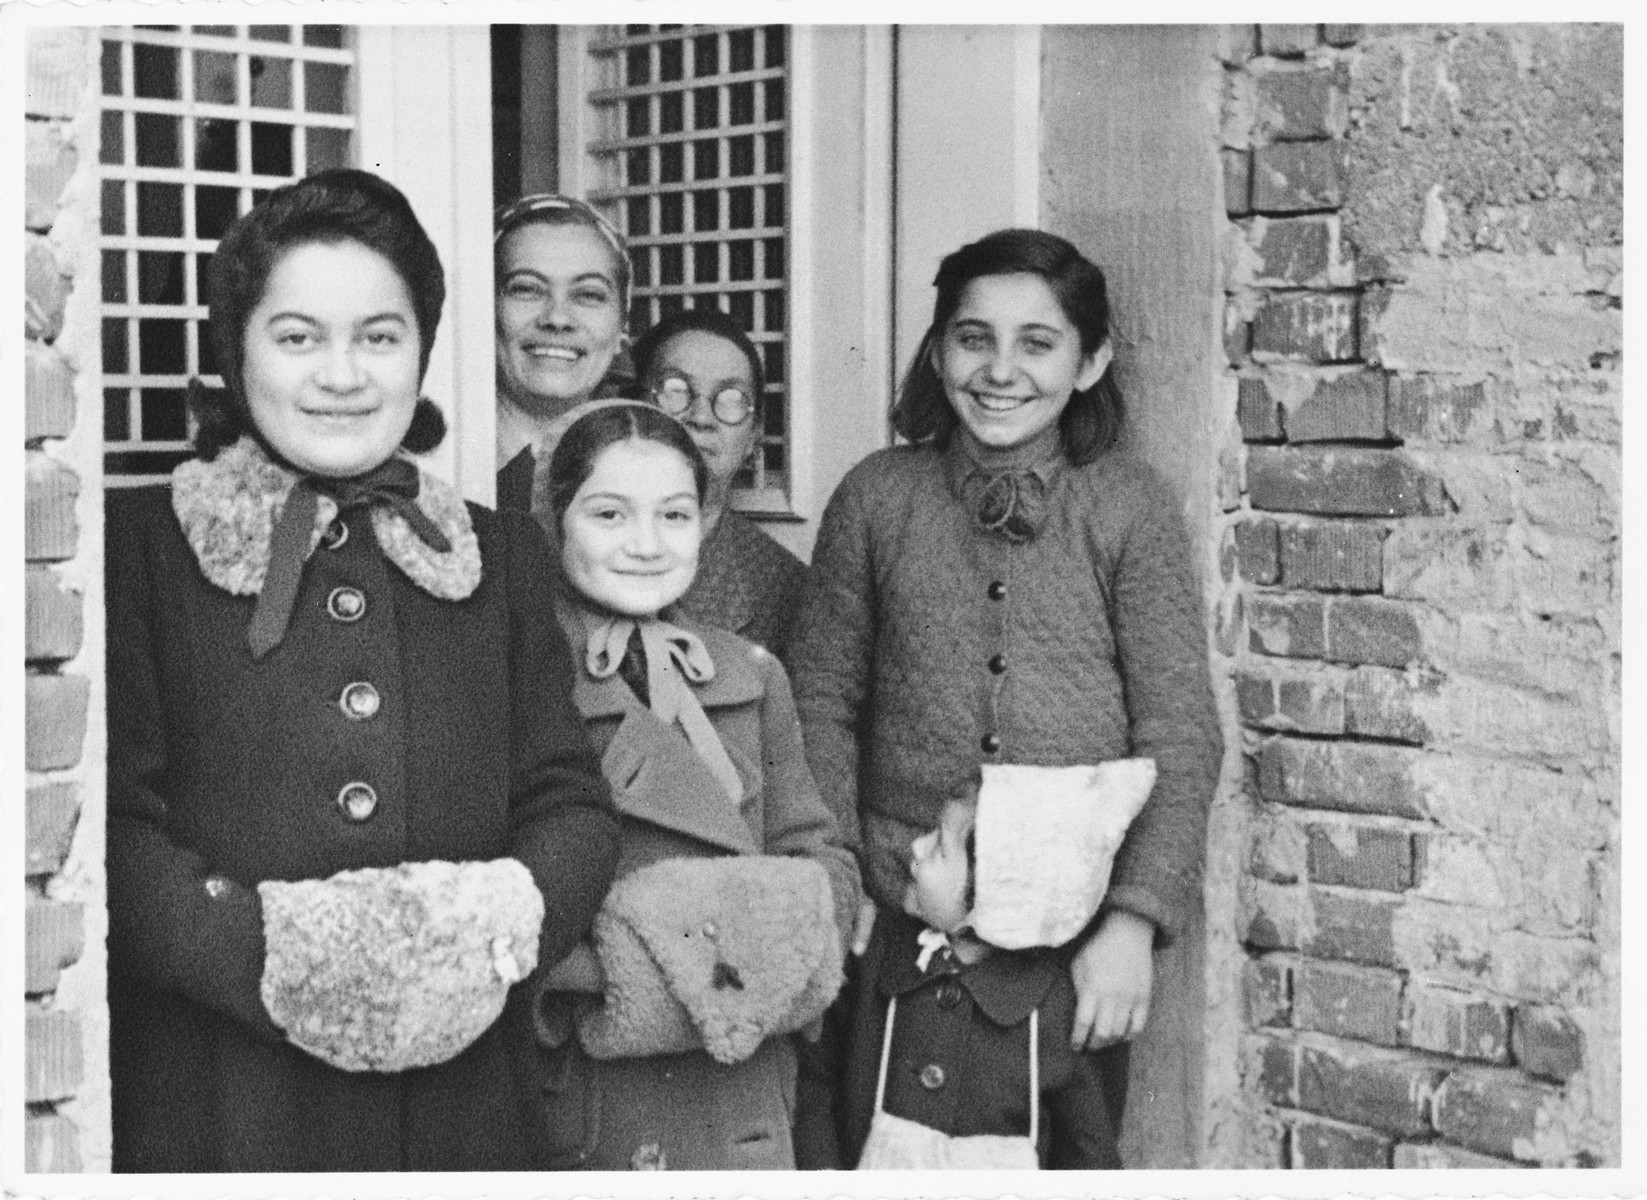 A Jewish family poses with their Croatian neighbors and friends.

Pictured in the ffront from left to right are: Zdenka and Vera Apler and their young cousin Dorica (Theodora) Basch.  Standing behind them are Blanka Apler (the mother of Vera and Zdenka), Maria Runjak and Stefica Grabaric.